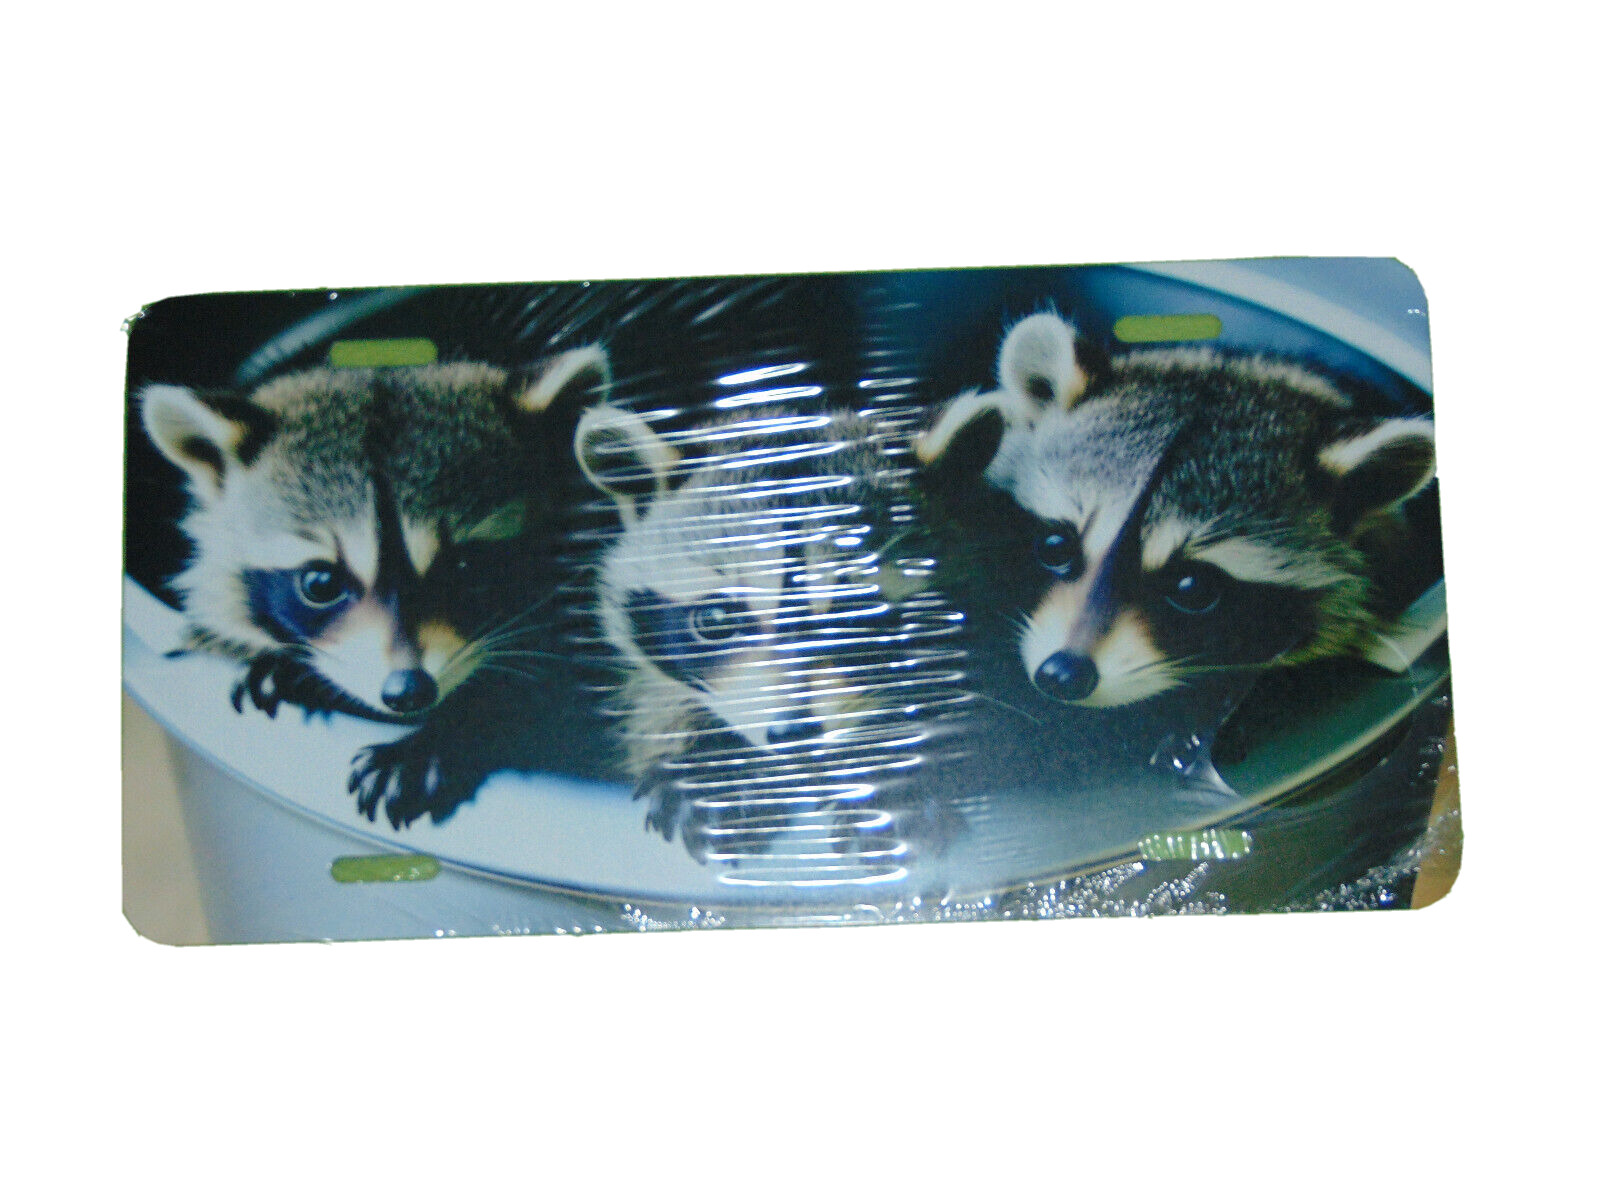 Bucket Full Of Baby Raccoons License Plate 6 X 12 Inches Aluminum New